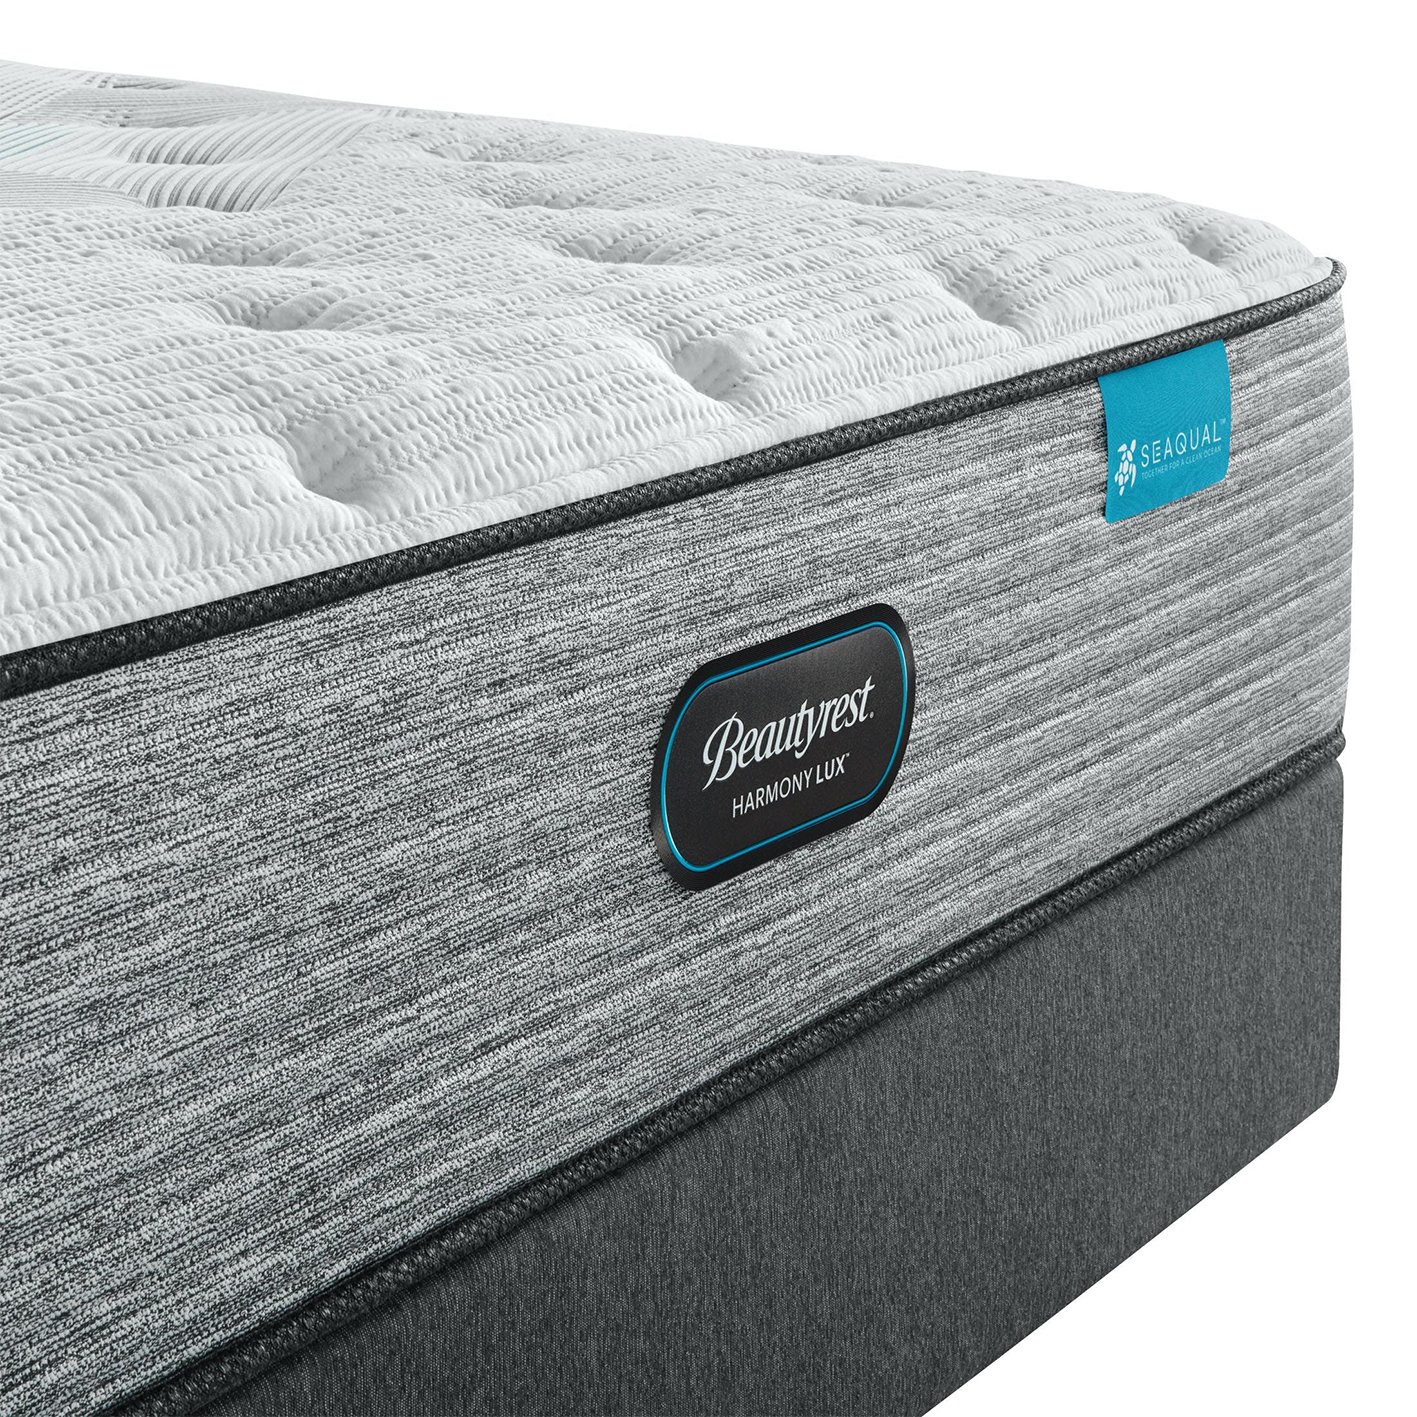 Save $200 on a Beautyrest mattress made using recovered ...